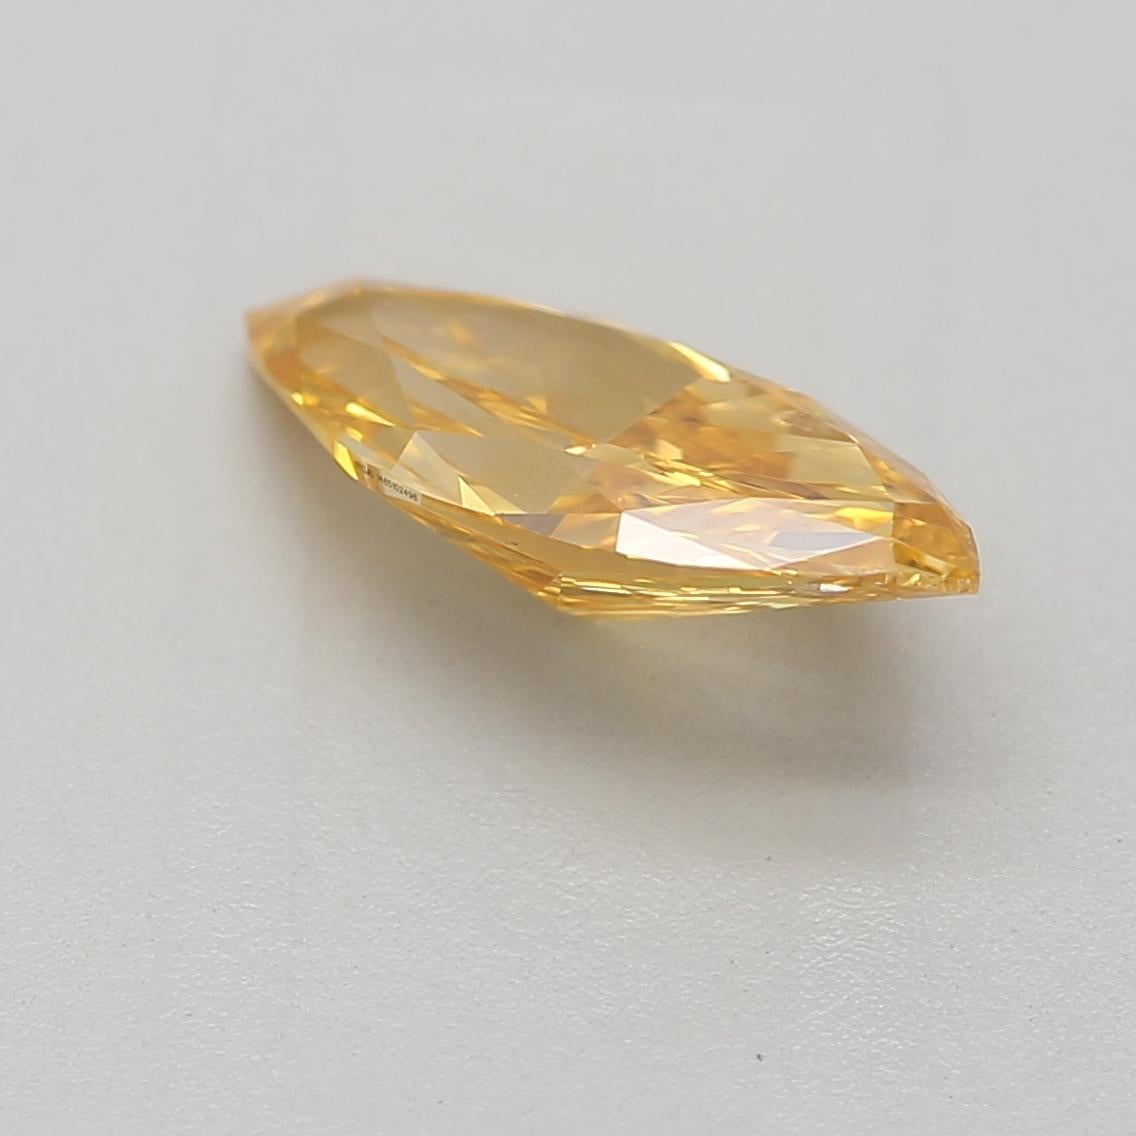 0.69-CARAT, FANCY VIVID ORANGE YELLOW, CUT DIAMOND I1 Clarity GIA Certified In New Condition For Sale In Kowloon, HK